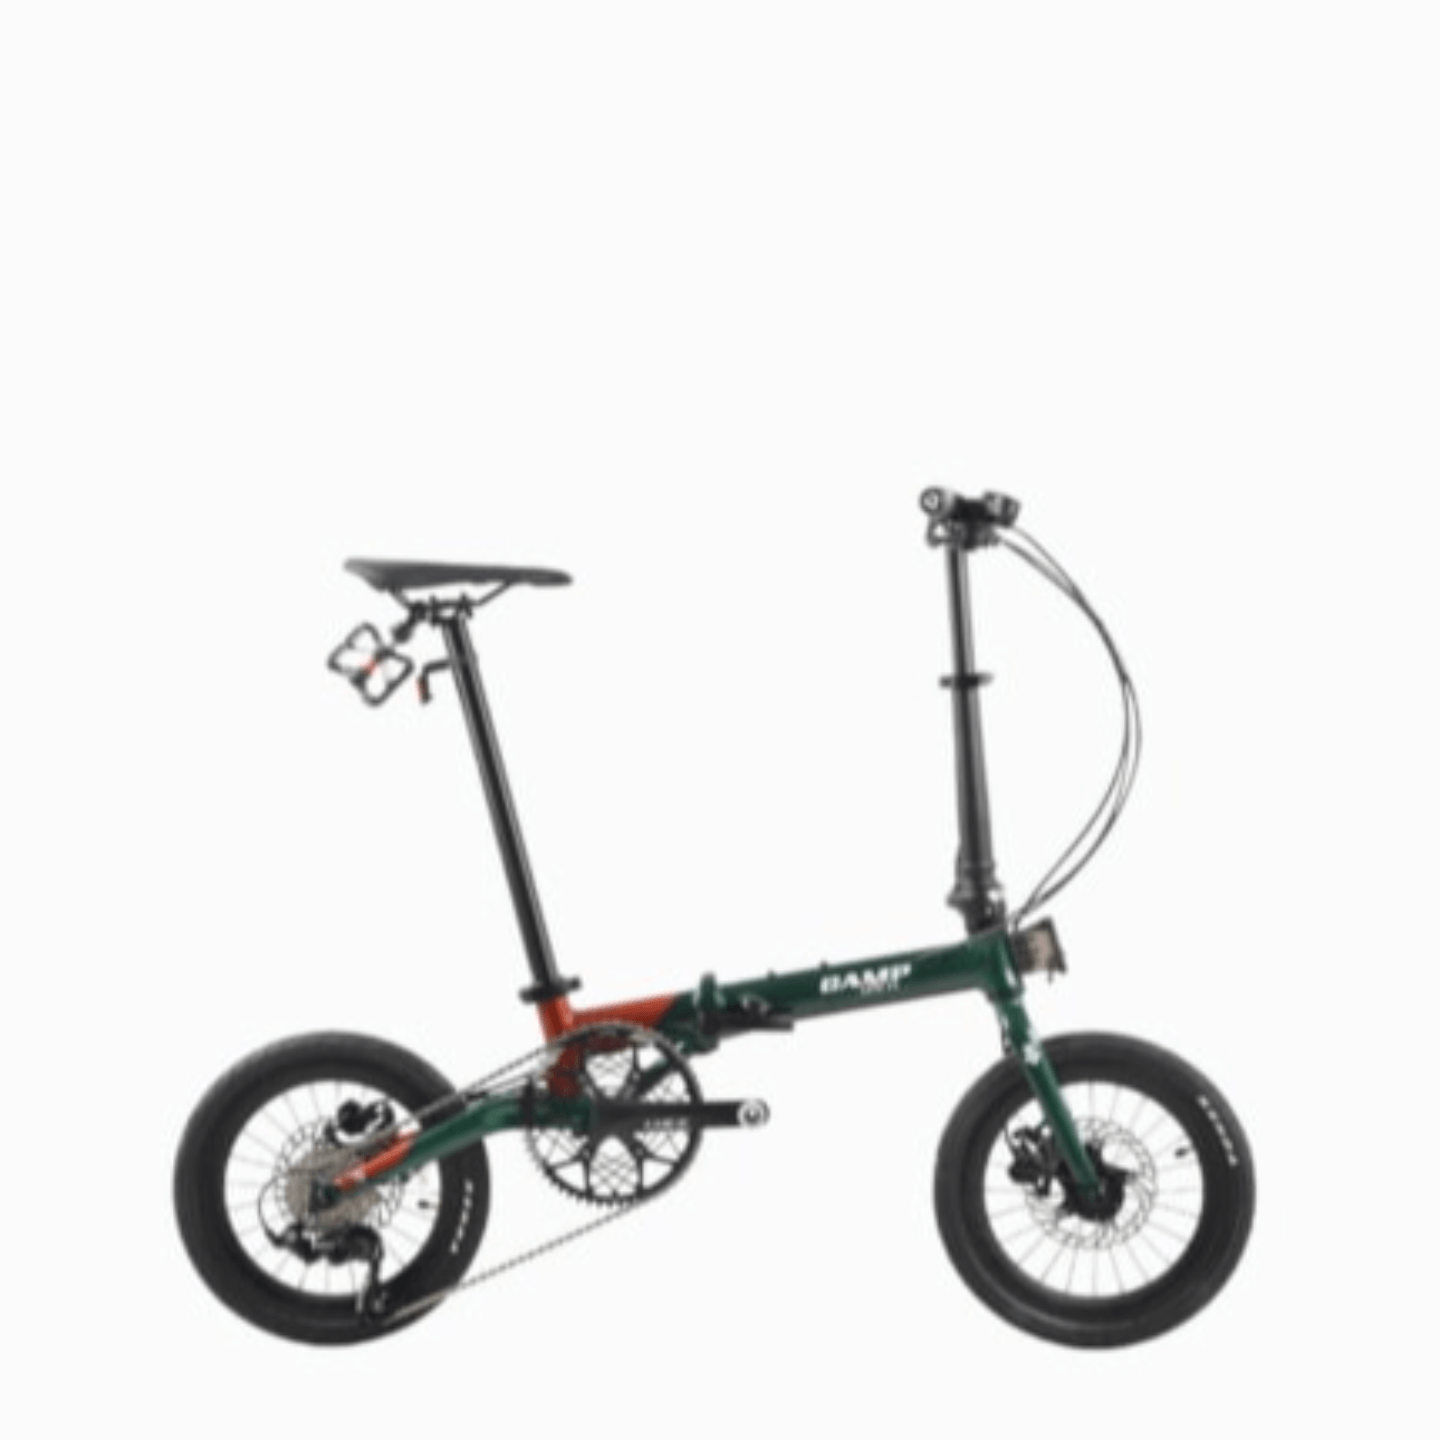 CAMP Lite 11 is the lightest 11 speeds foldable bicycle bike.